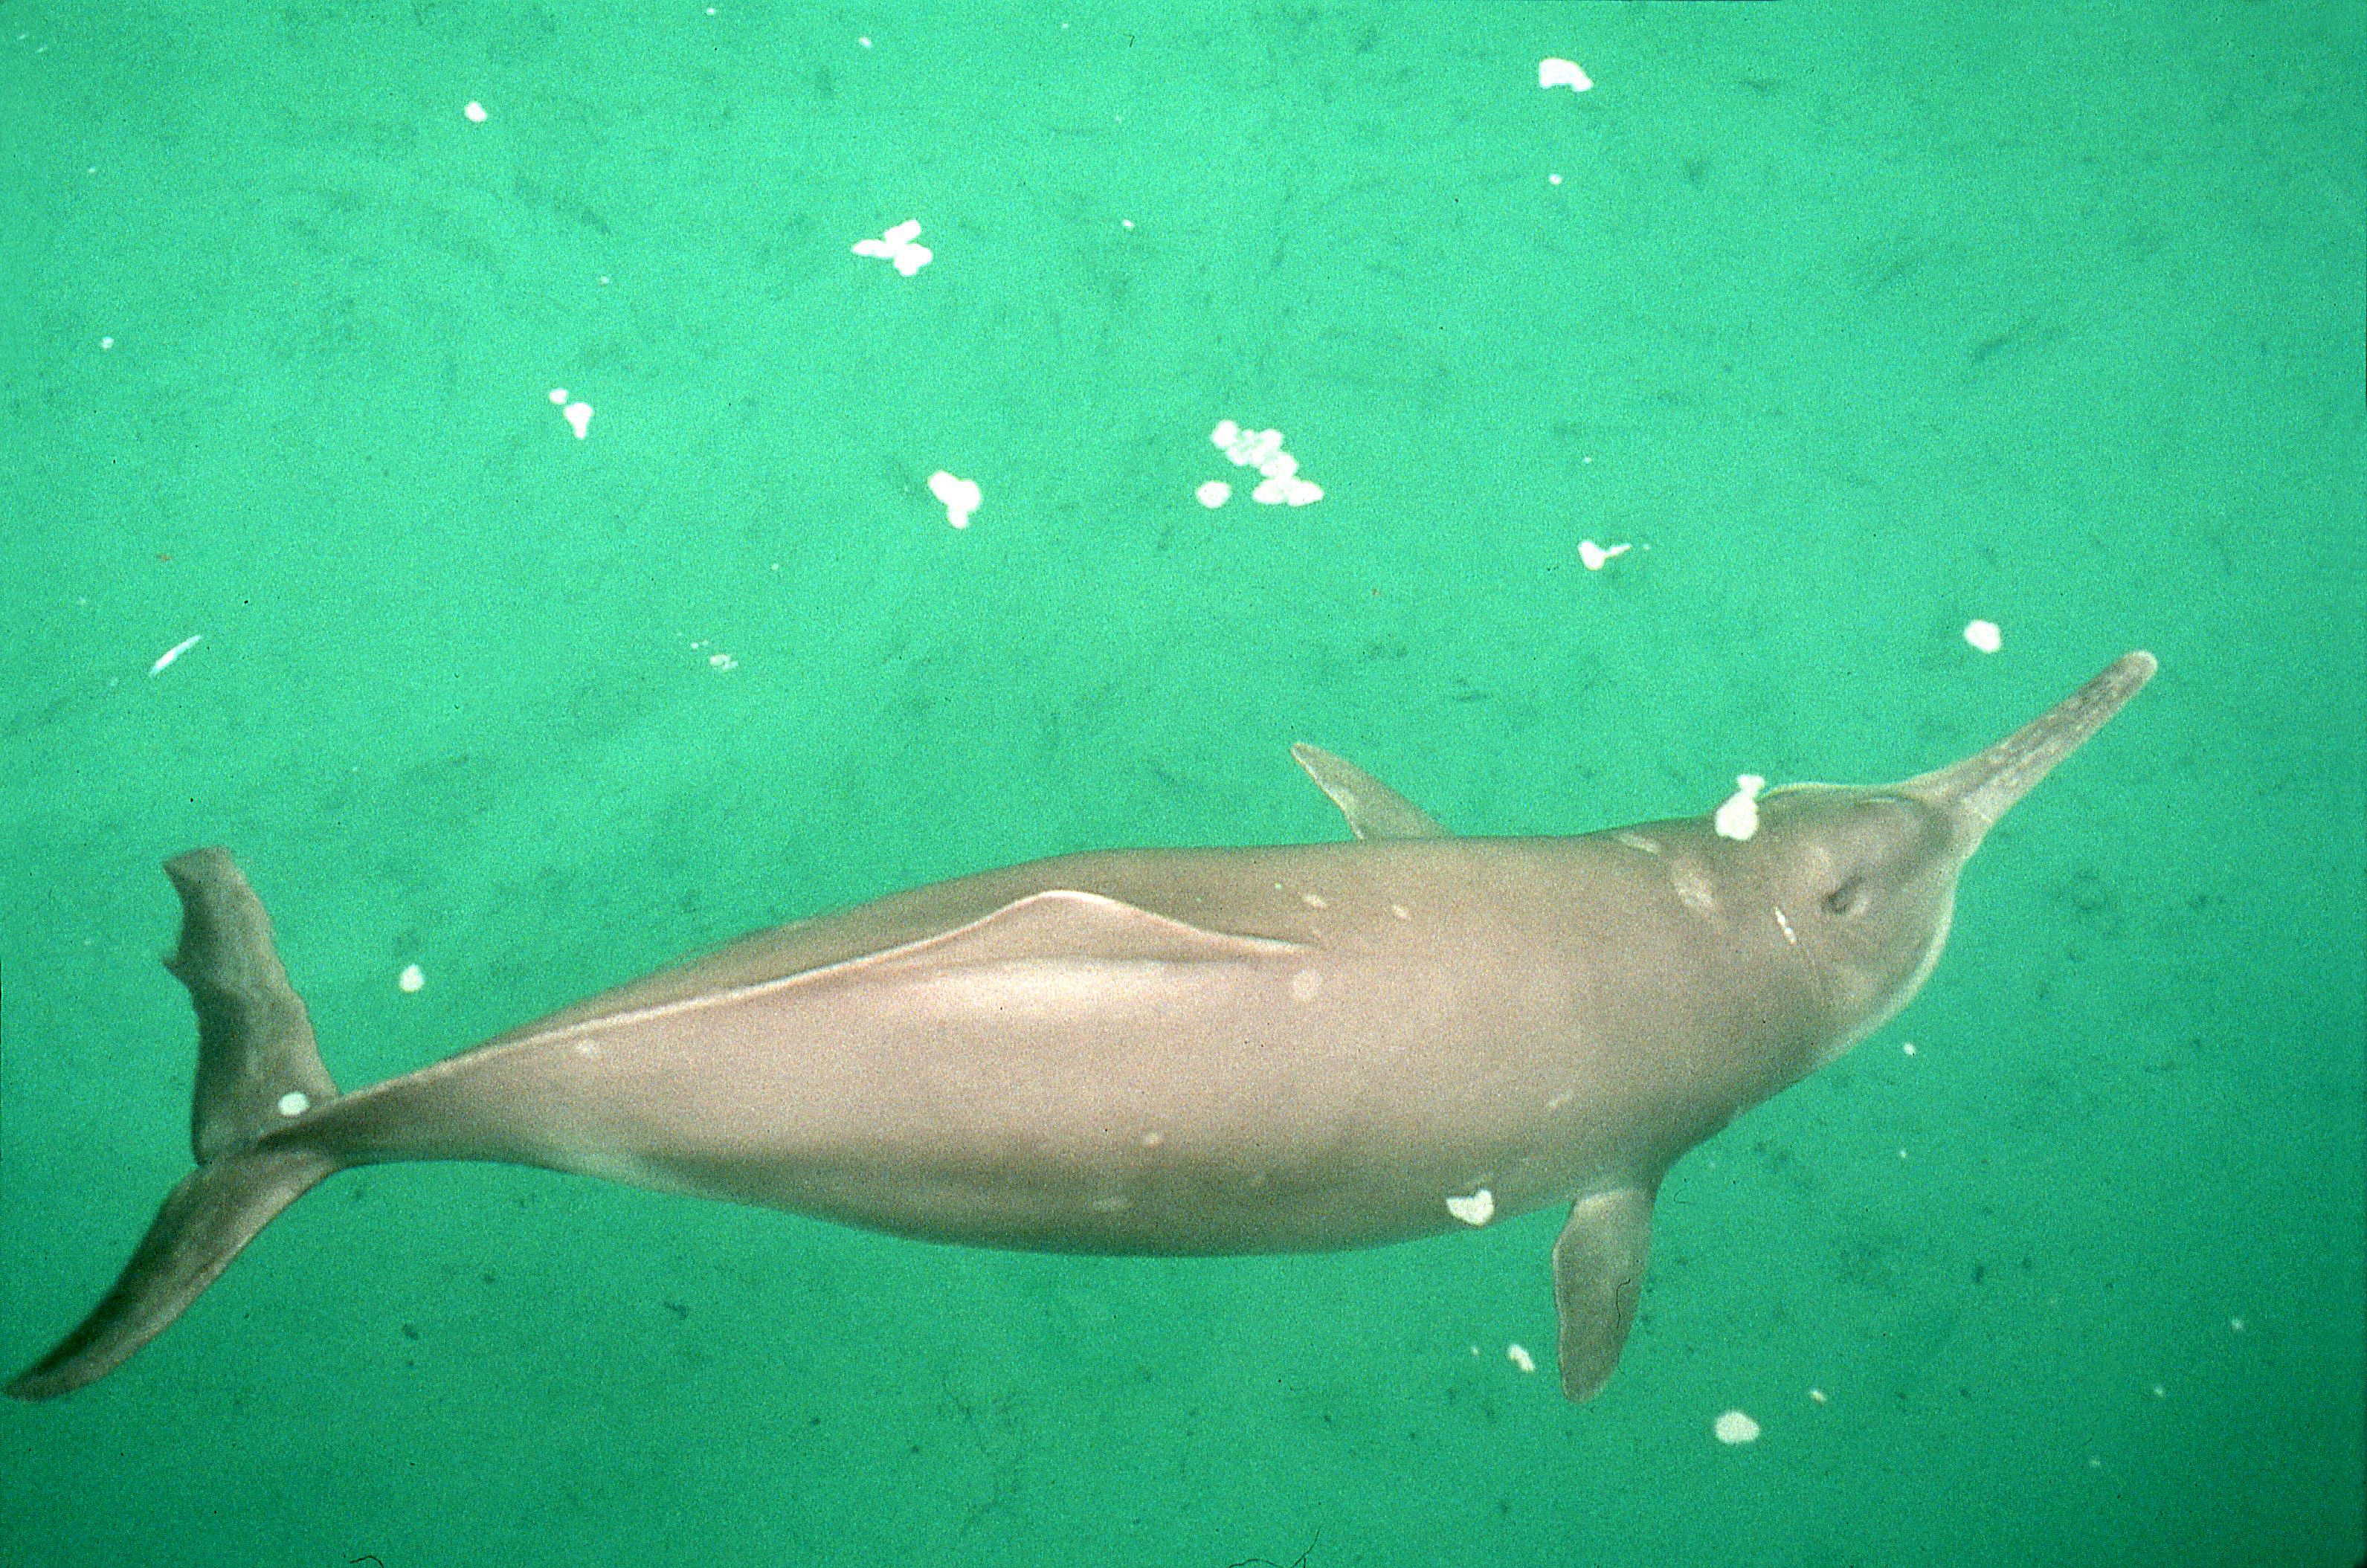 <p>Known as the Yangtze river dolphin, or the Chinese lake dolphin, the Baiji was <a href="https://us.whales.org/whales-dolphins/species-guide/baiji">declared functionally extinct</a> in 2007. This was announced after a dedicated six-week expedition in 2006 failed to find a single Baiji in its native waters. Industrialization along the Yangtze River, coupled with <a href="https://www.nhm.ac.uk/discover/baiji-why-this-extinct-river-dolphin-still-matters.html">overfishing and pollution</a>, led to its decline. The construction of dams and increased boat traffic also further impacted their habitat. </p>